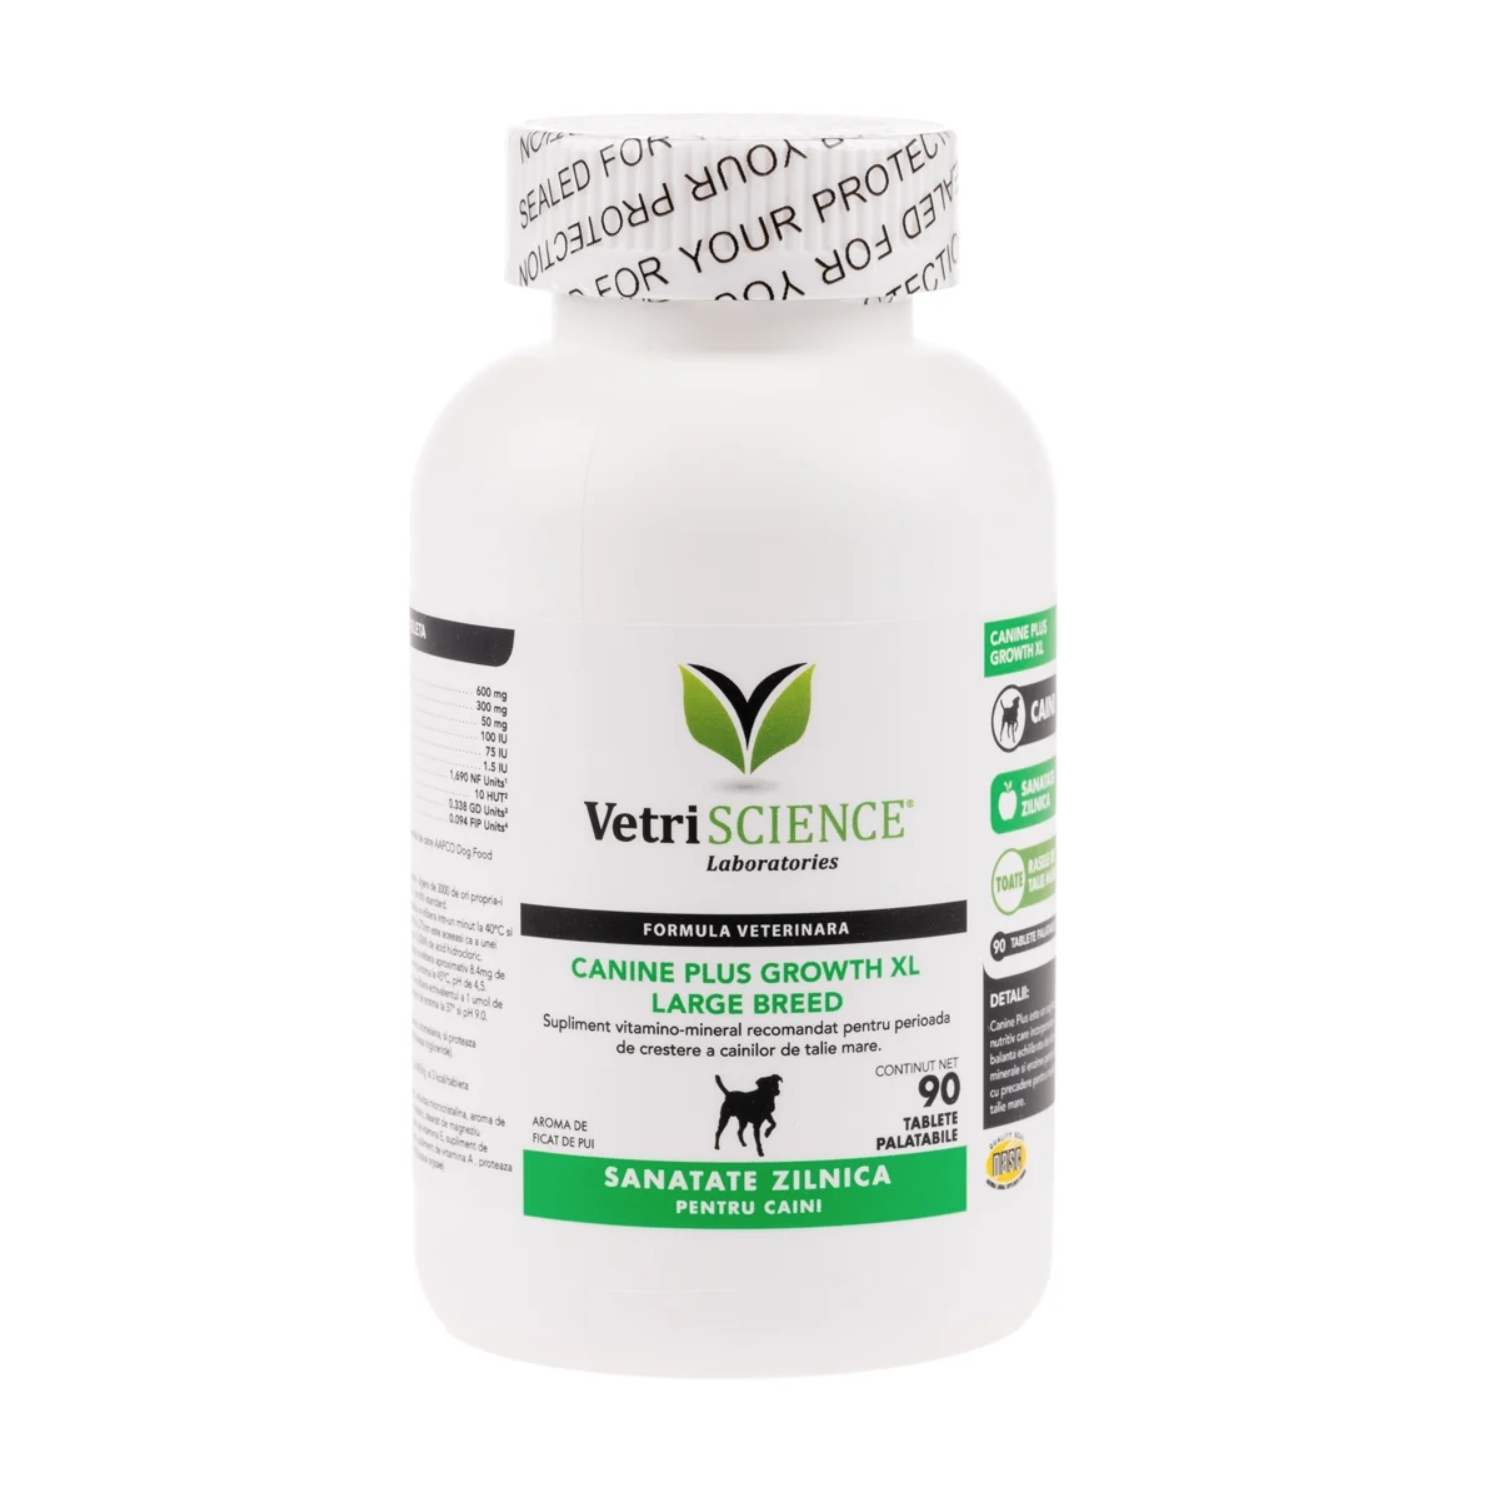 Suplimente nutritive - Canine Plus Growth XL Large Breed 90 tbl - Vetri-Science, magazindeanimale.ro